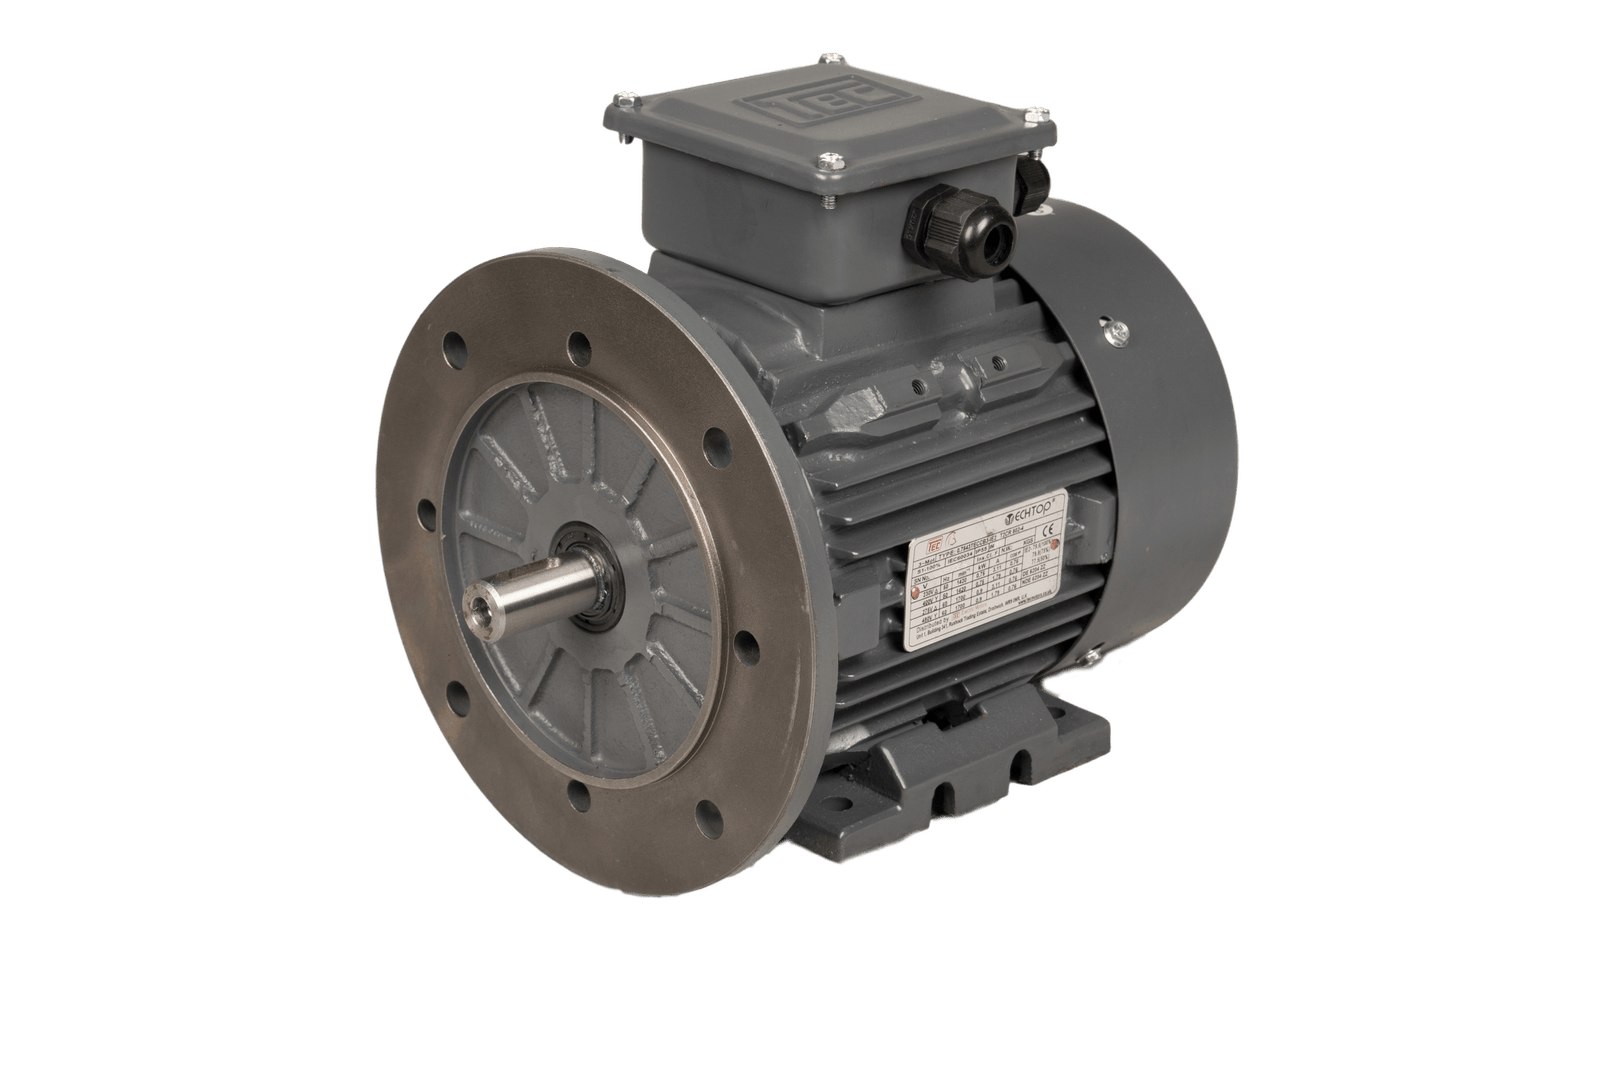 cast iron 3 phase electric motor in all grey